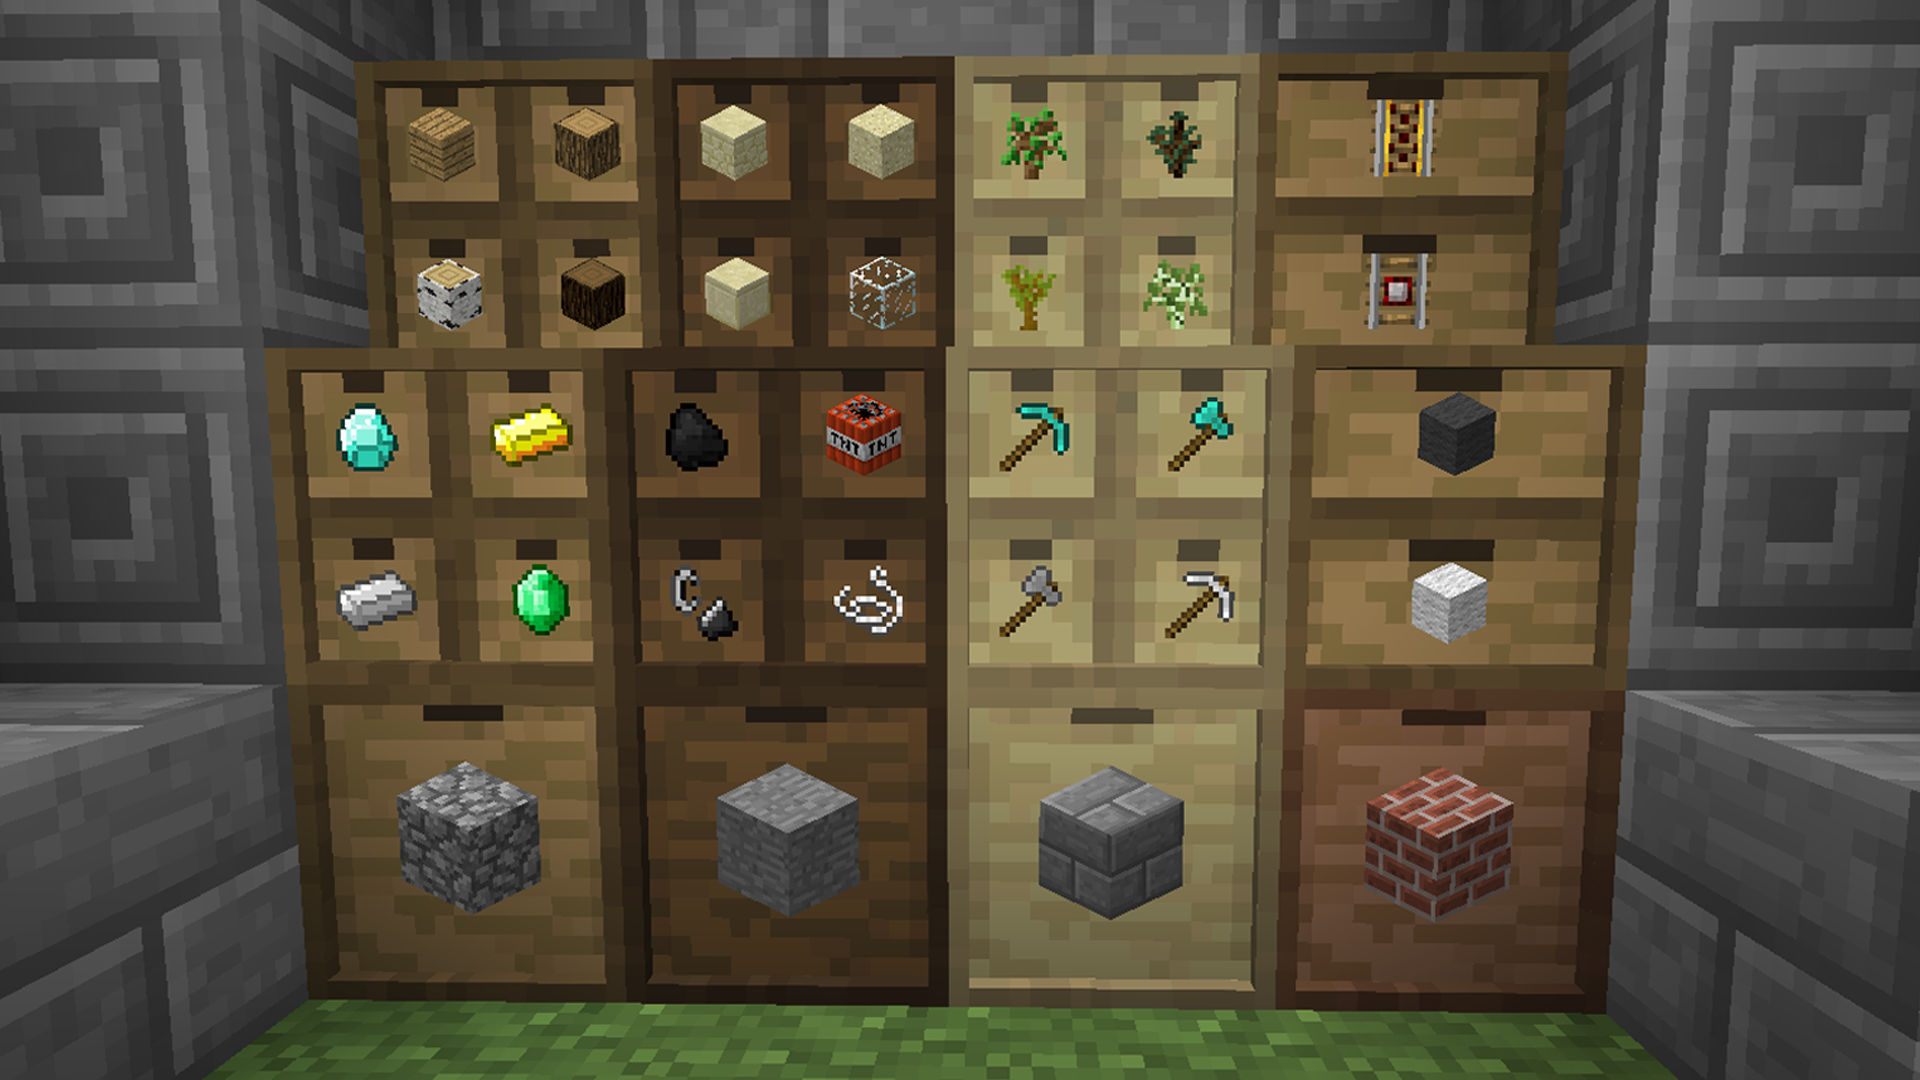 https://www.minecraftmods.com/wp-content/uploads/2015/05/drawers.png